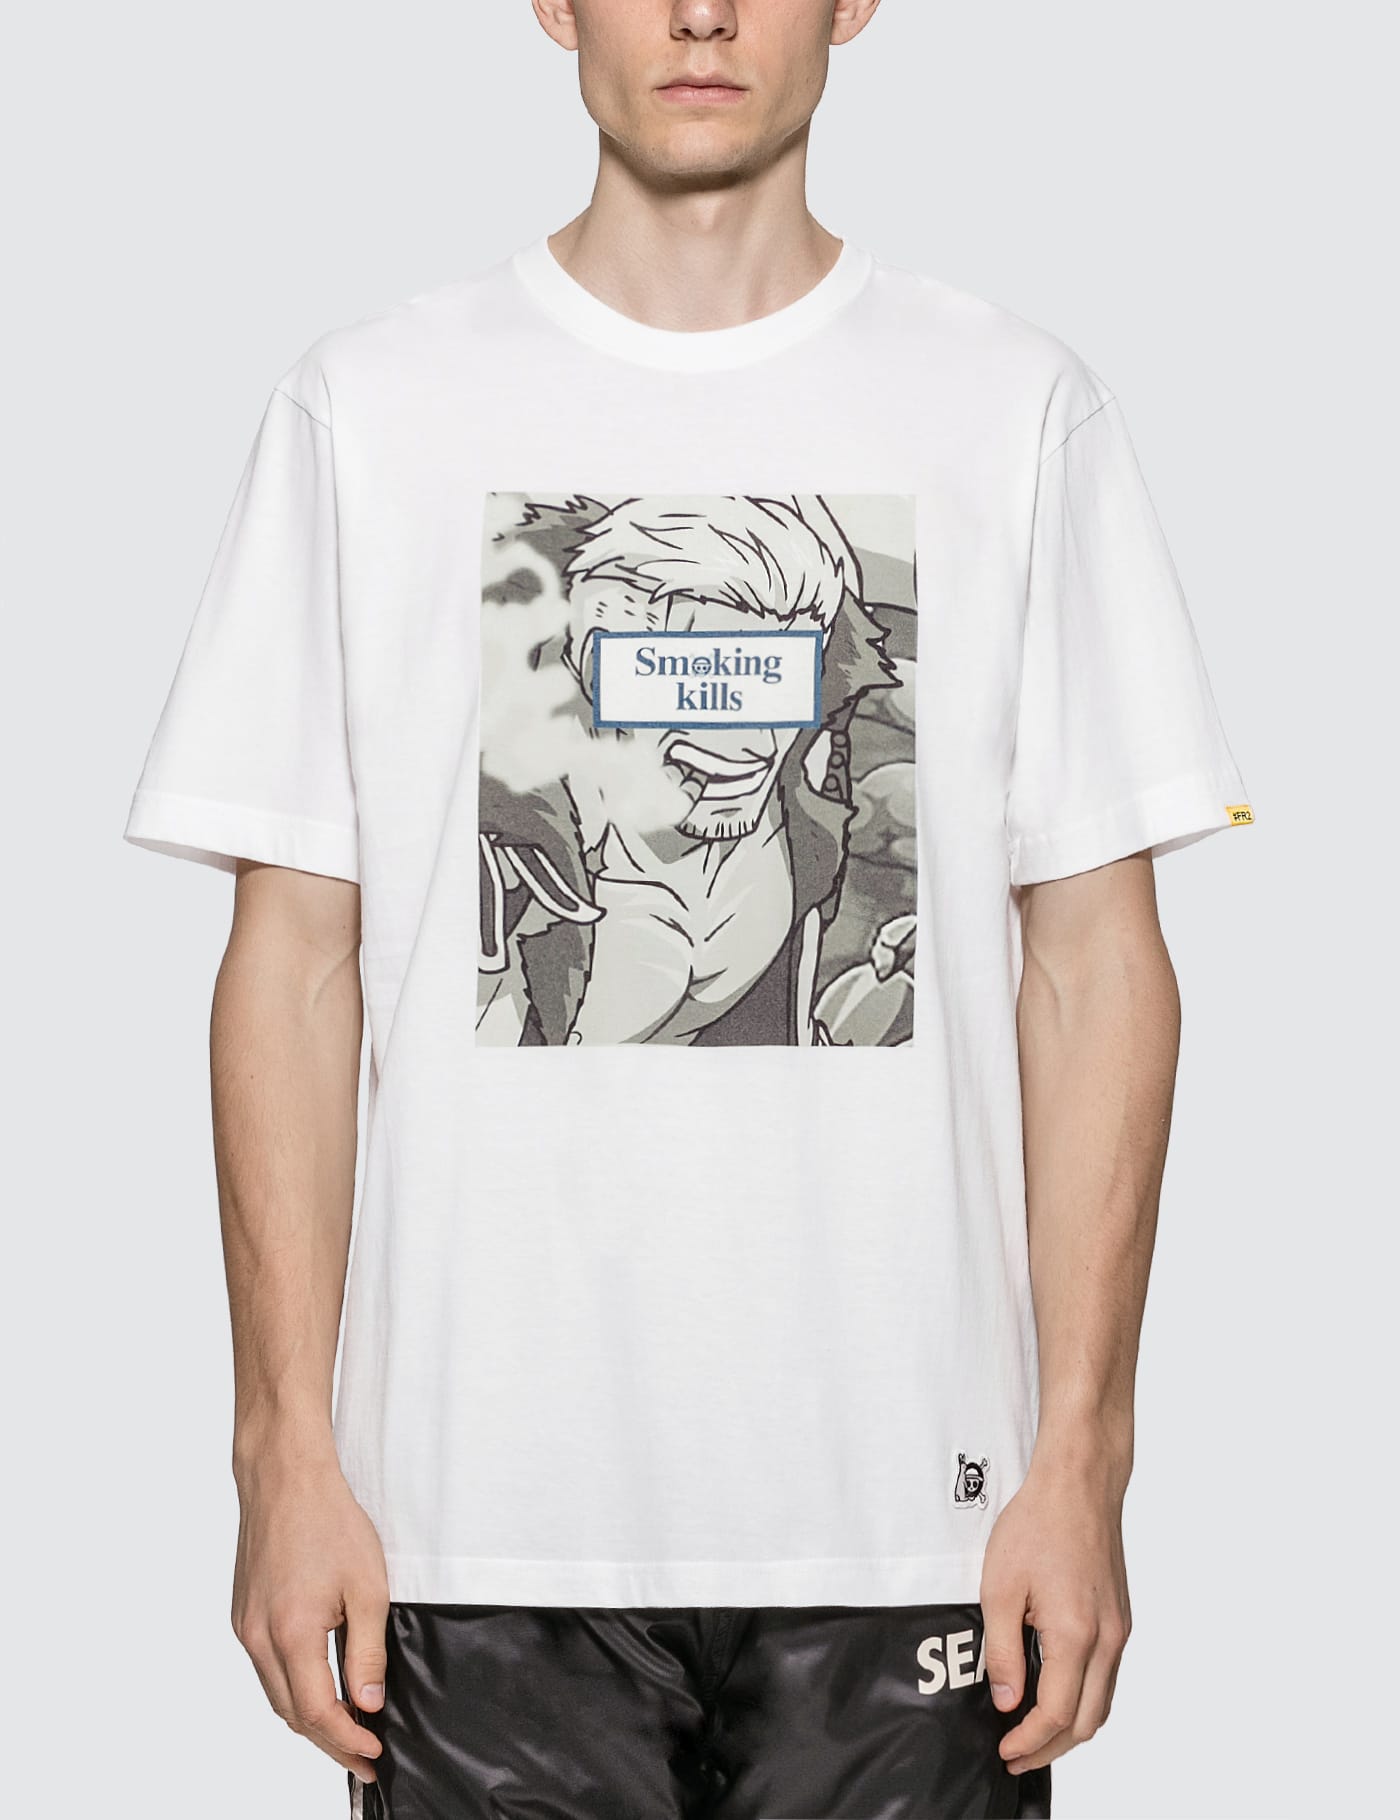 #FR2 - #FR2 X One Piece Smokers T-shirt | HBX - Globally Curated